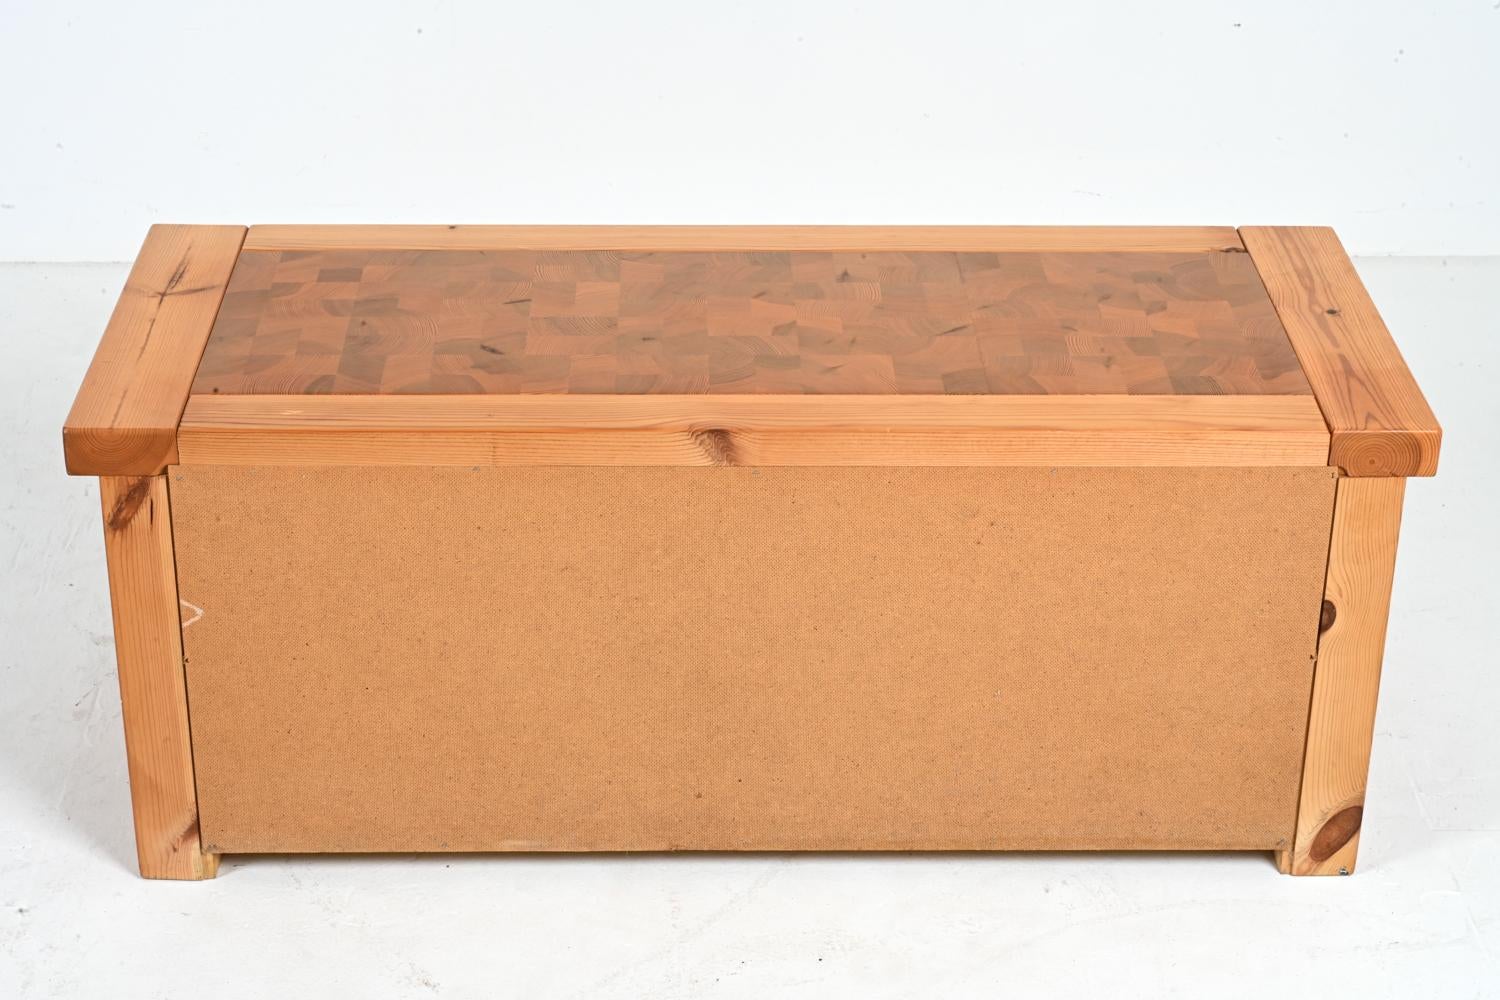 Rolf Middleboe for Tranekær Pine Parquetry Chest, 1970's For Sale 7